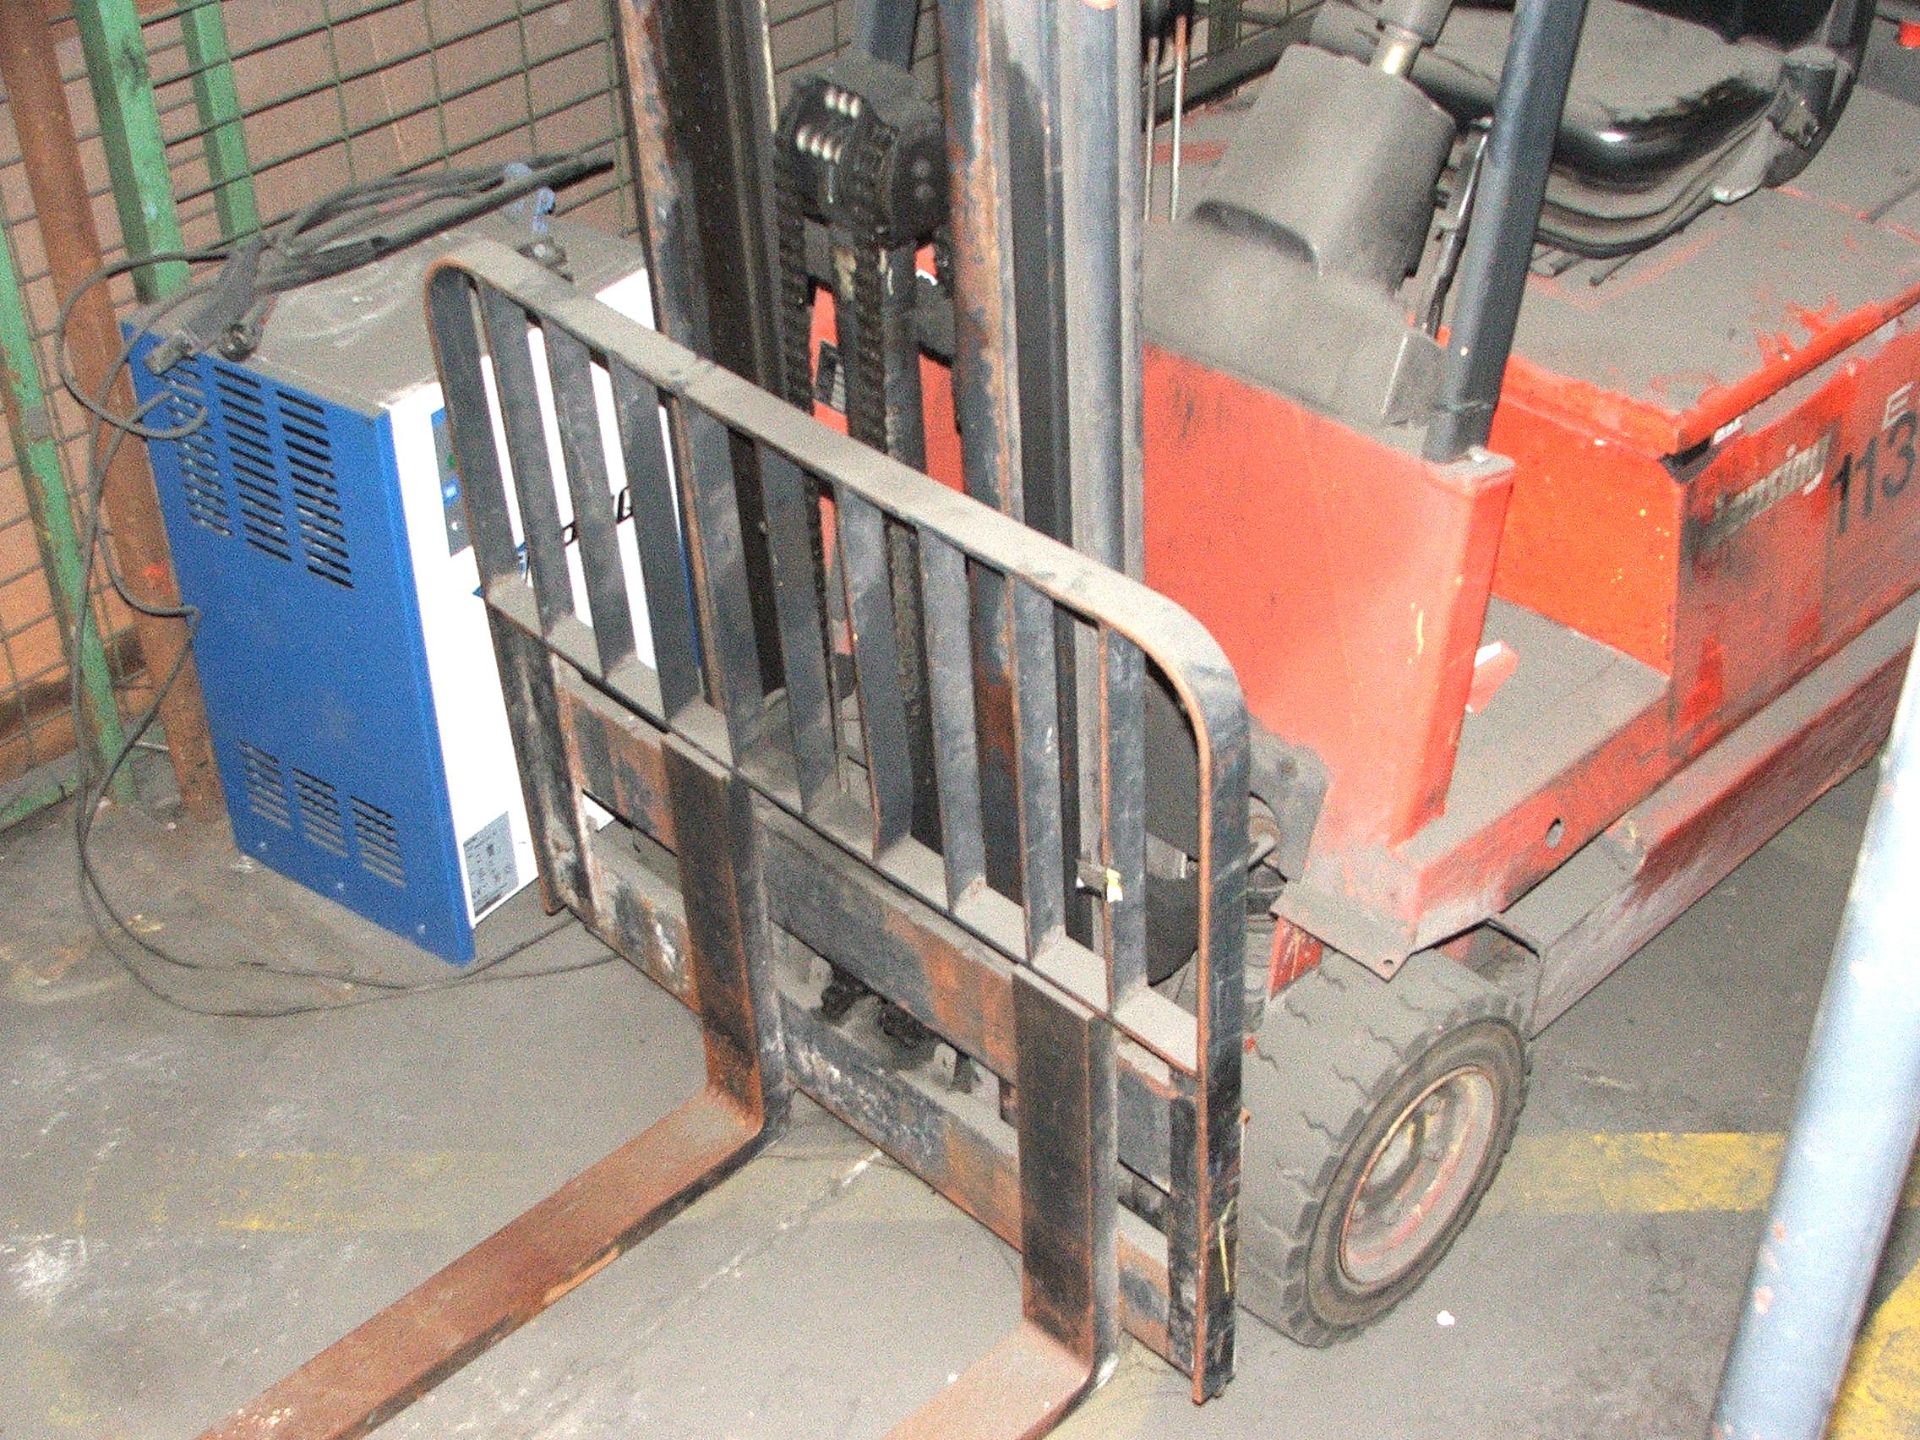 LASING LINDE E152 1.5 TON BATTERY POWERED FORK LIFT TRUCK 3560 HRS WITH CHARGER (LOCATED - Image 2 of 3